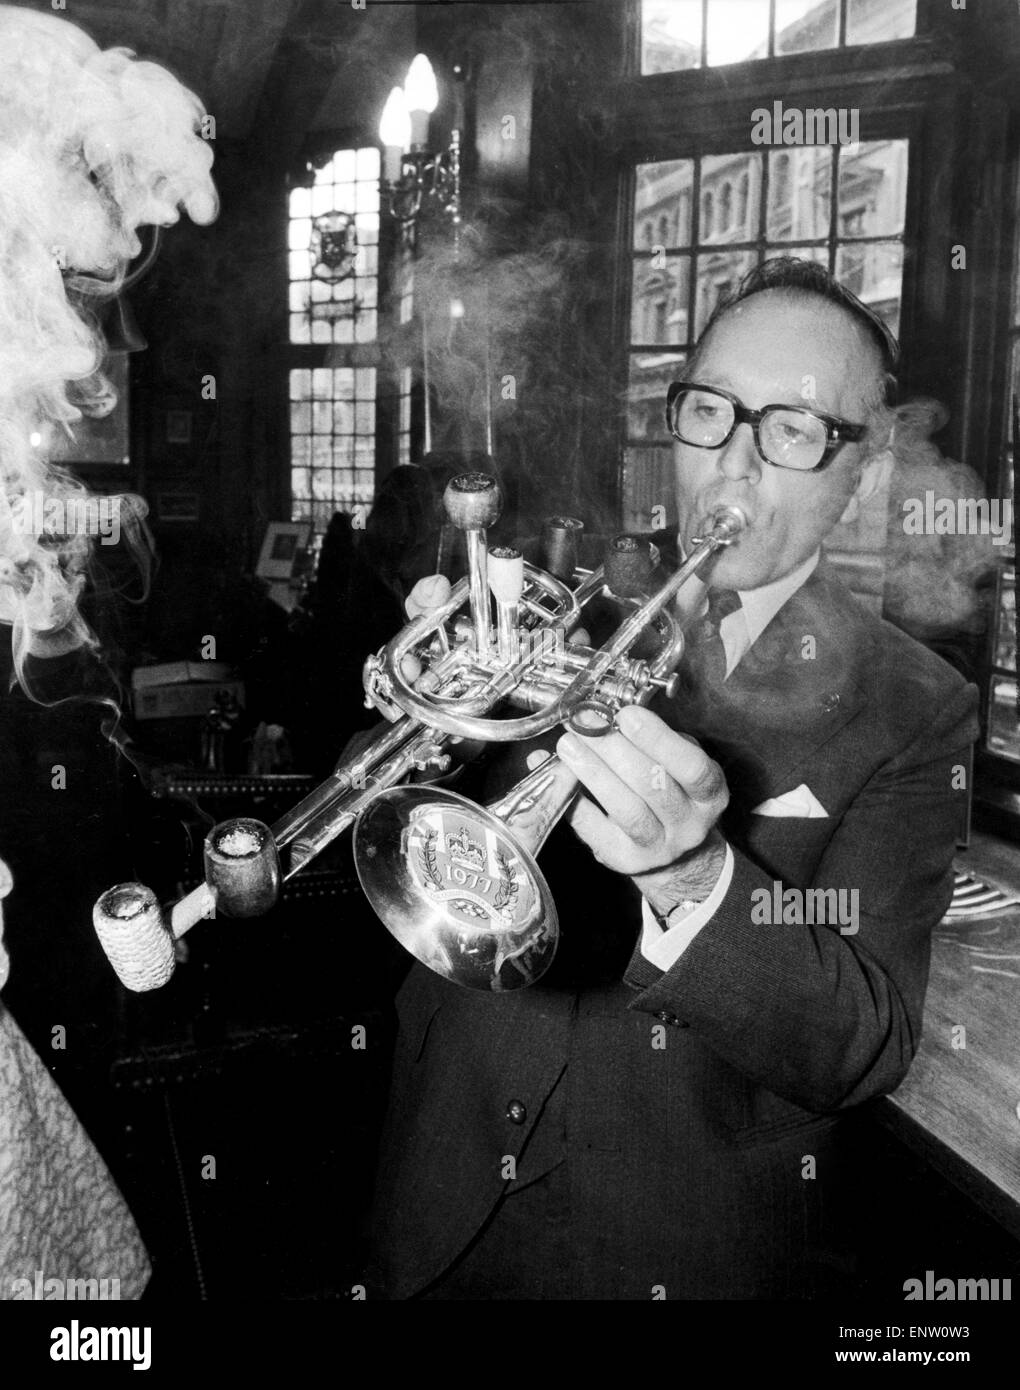 Mr Brian Cole winner of the Remarkable Pipe Contest seen here smoking / playing his Silver Jubilee Fanfare Pipe, a trumpet with six pipes attached at the Prince Henry's in Fleet Street. 26th July 1977 Stock Photo